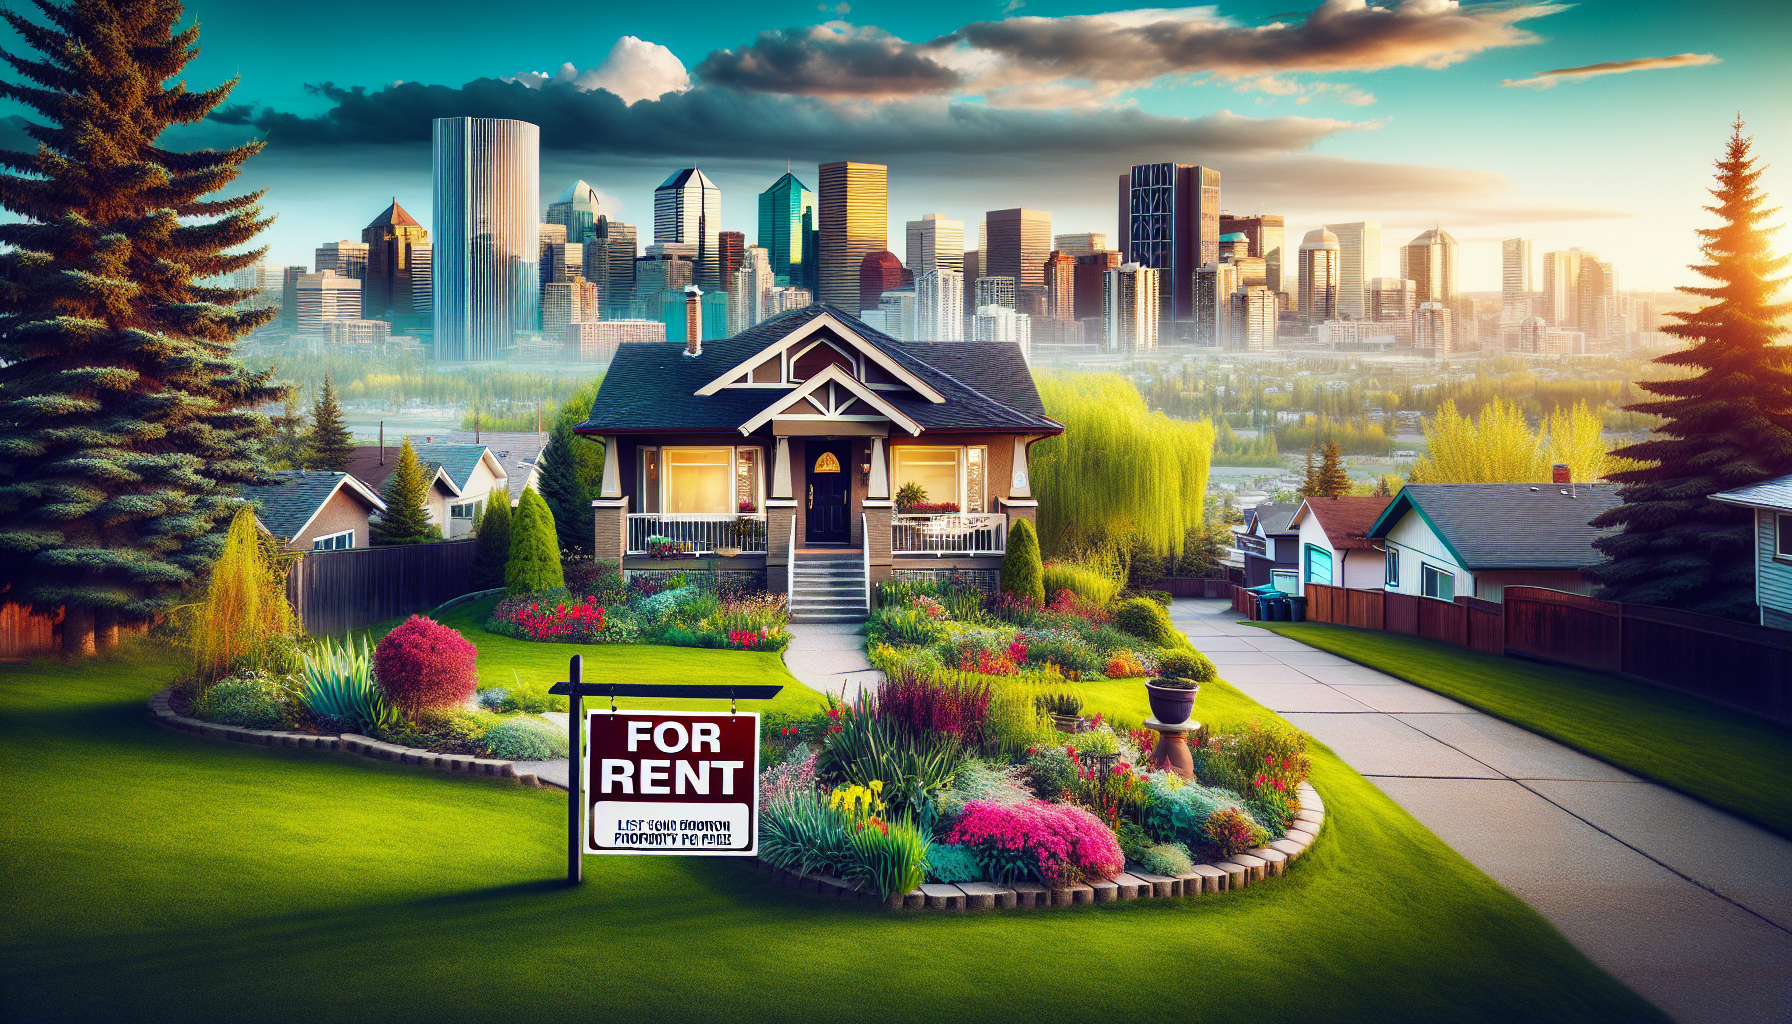 Maximize Exposure List Your Edmonton Property for Rent for Free